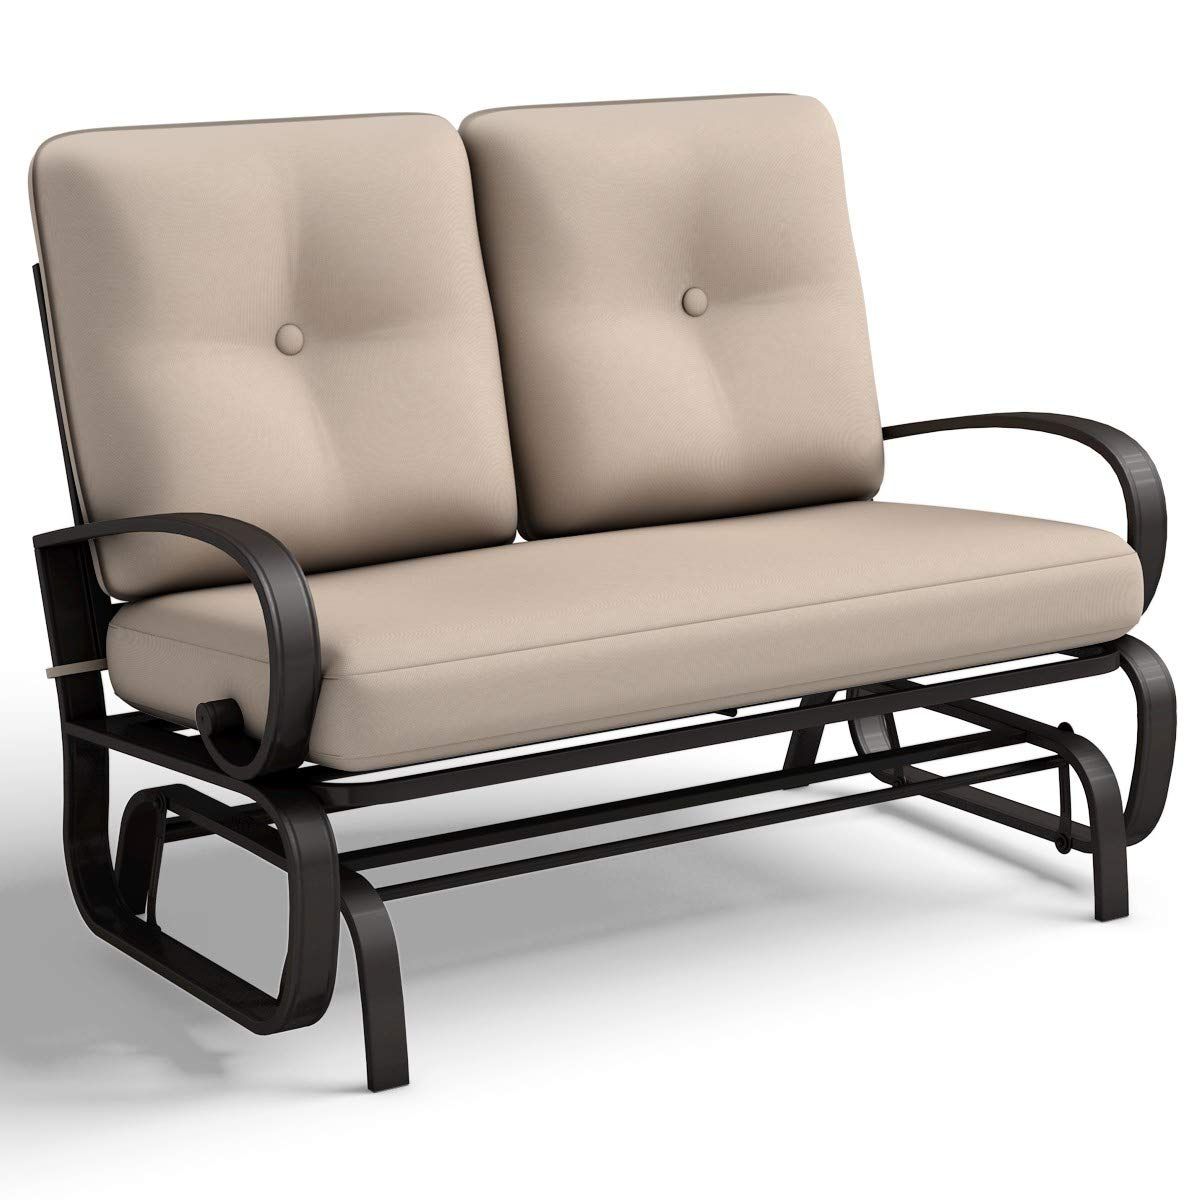 Twin Seat Glider Benches For Well Known Suntime 2 Seater Havana Twin Seat Glider – Bronze – Buy (Photo 14 of 31)